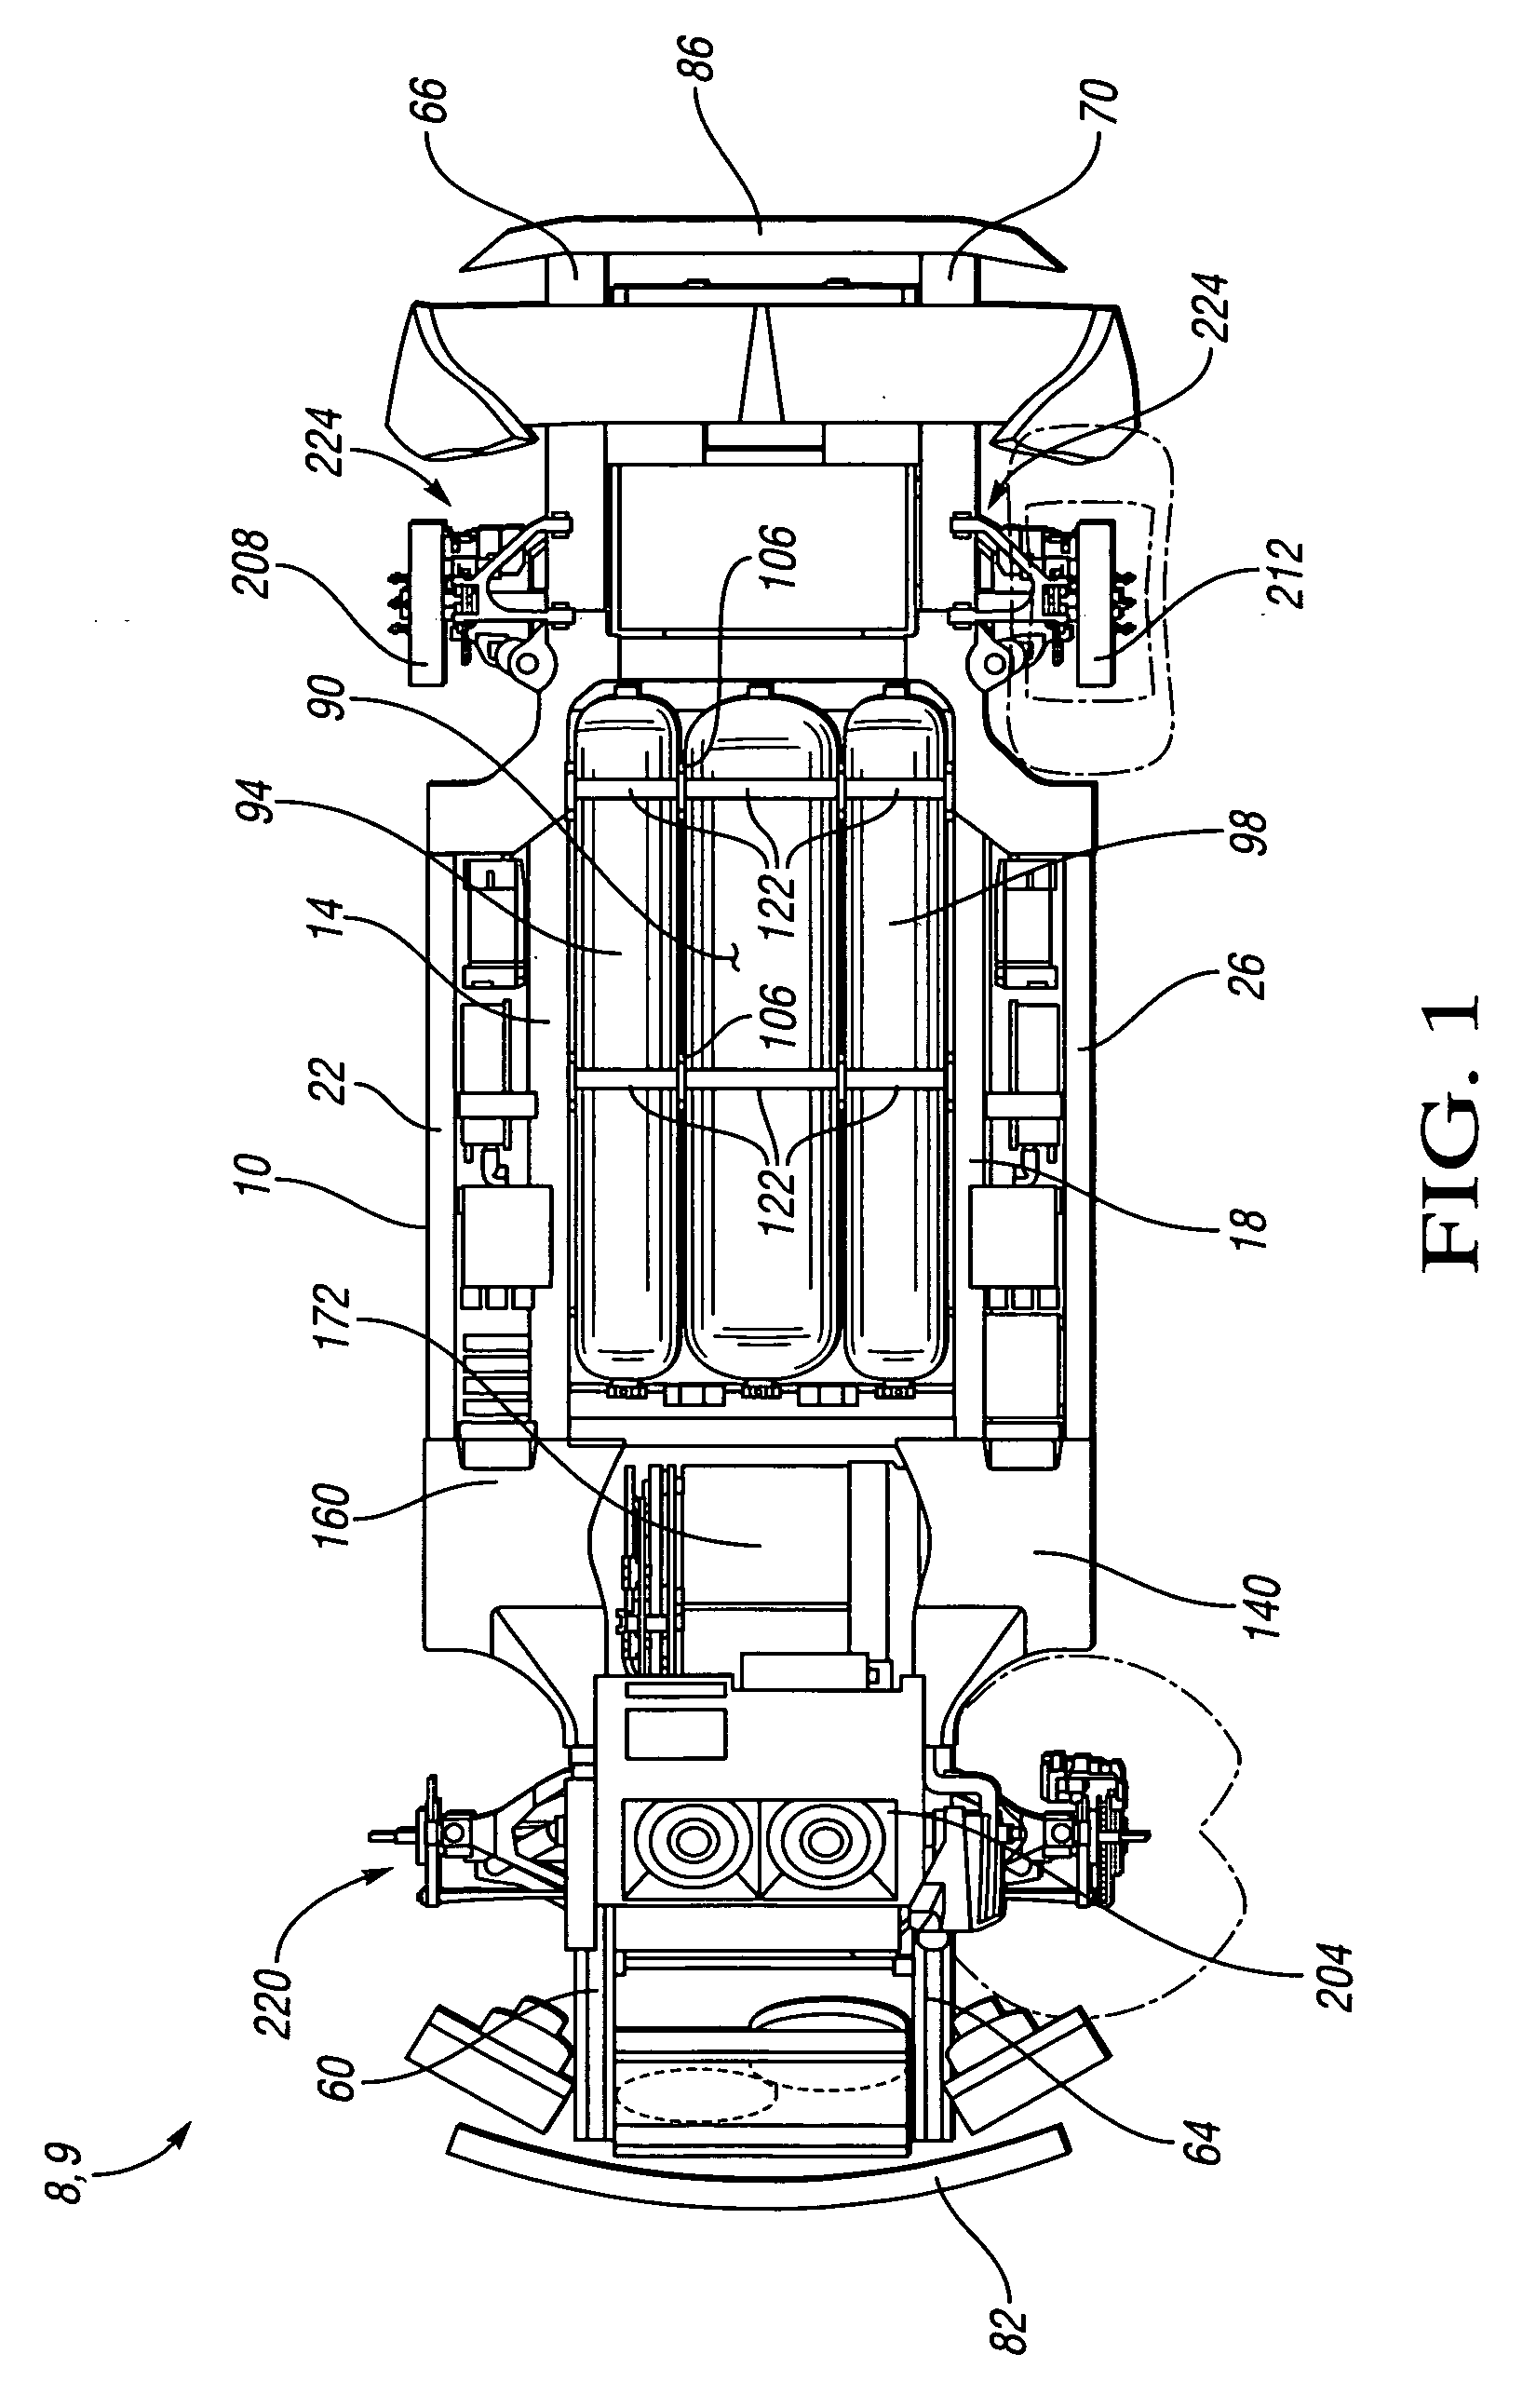 Compressed gas tank carrier assembly